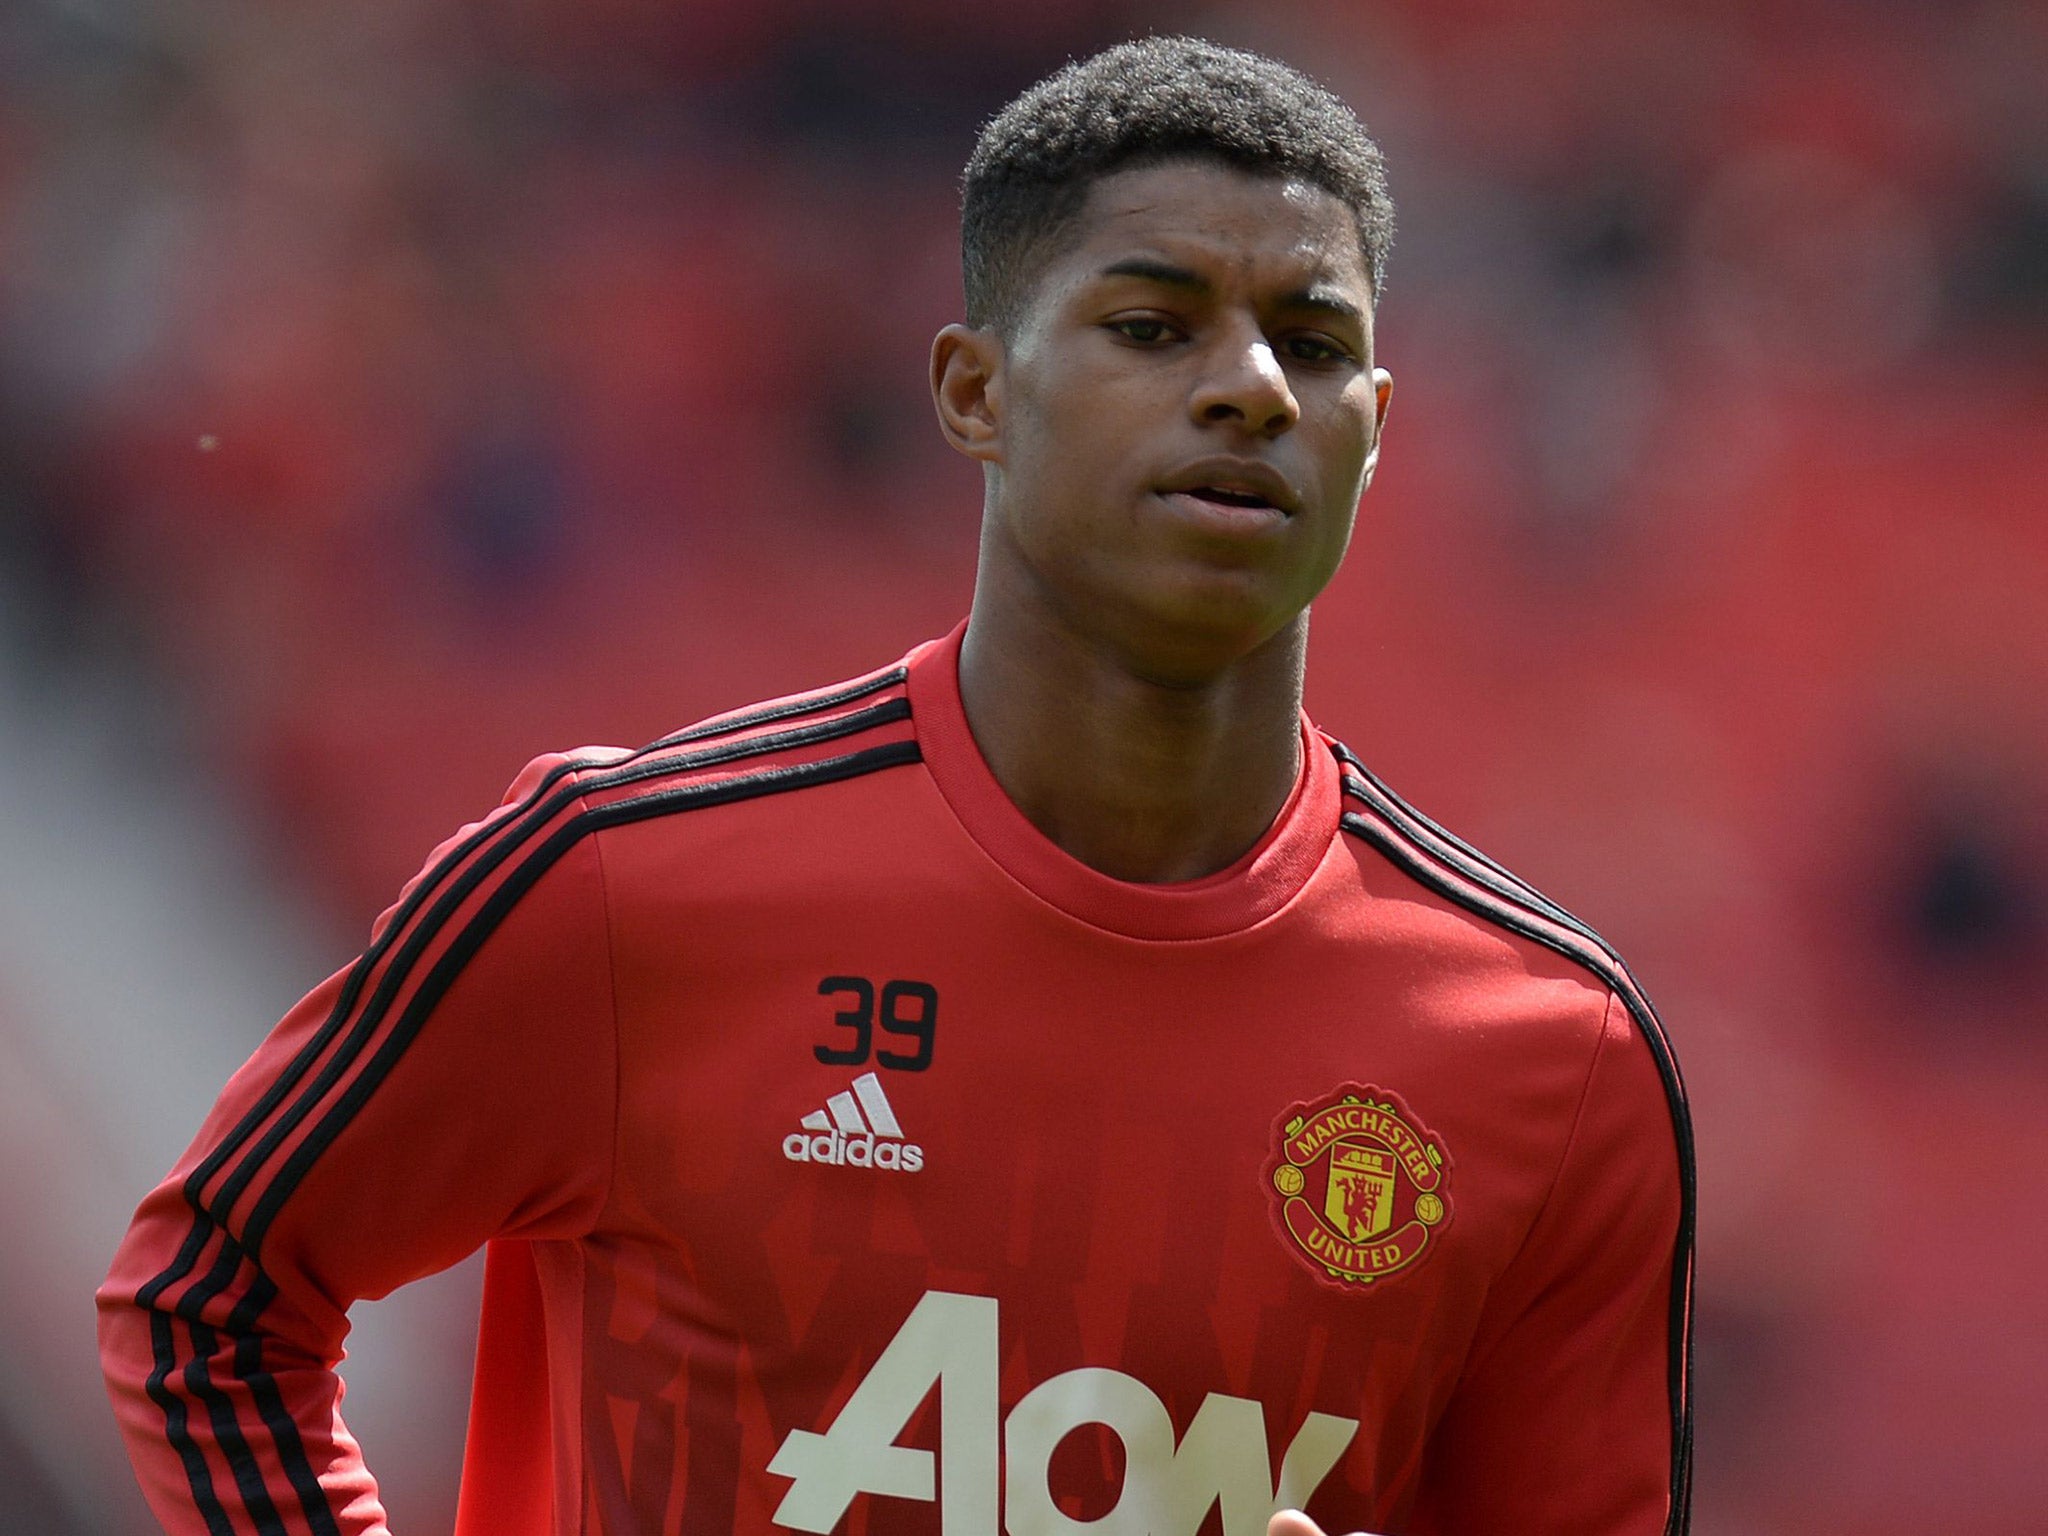 Marcus Rashford has been included in England's preliminary Euro 2016 squad